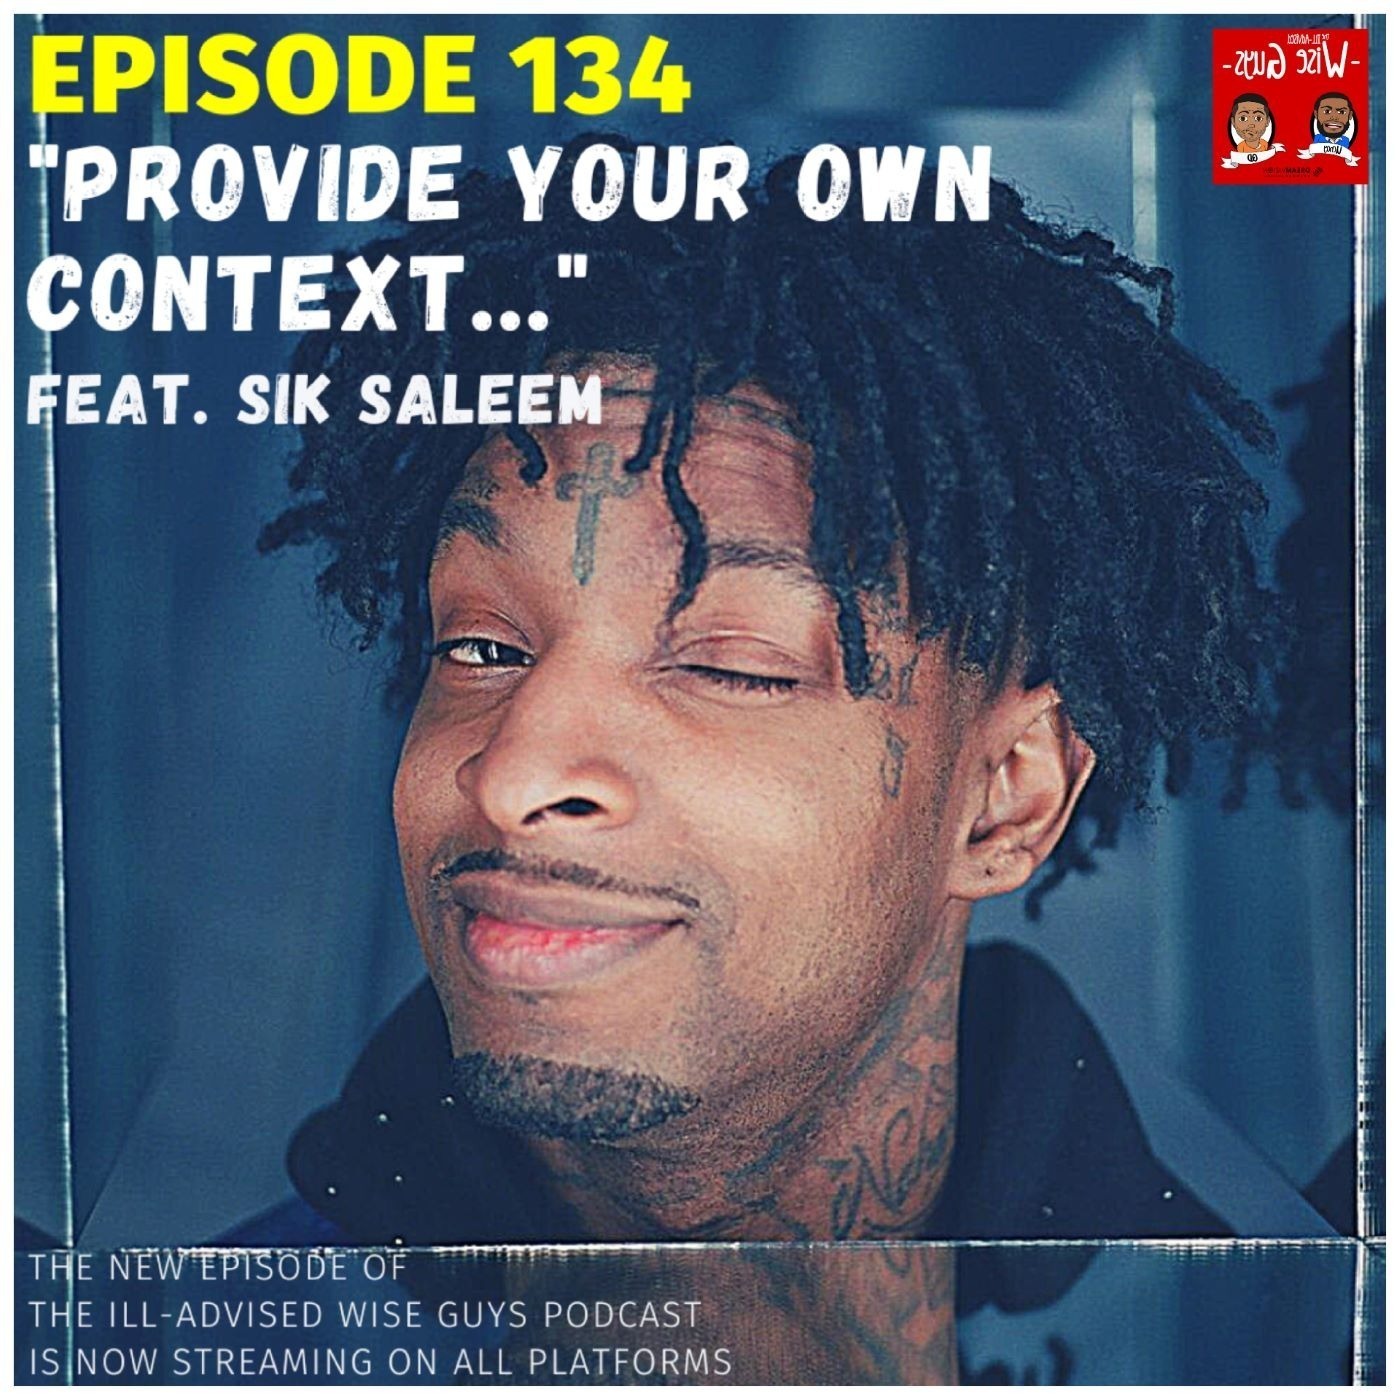 Episode 134 - "Provide Your Own Context..." (Feat. Sik Saleem)